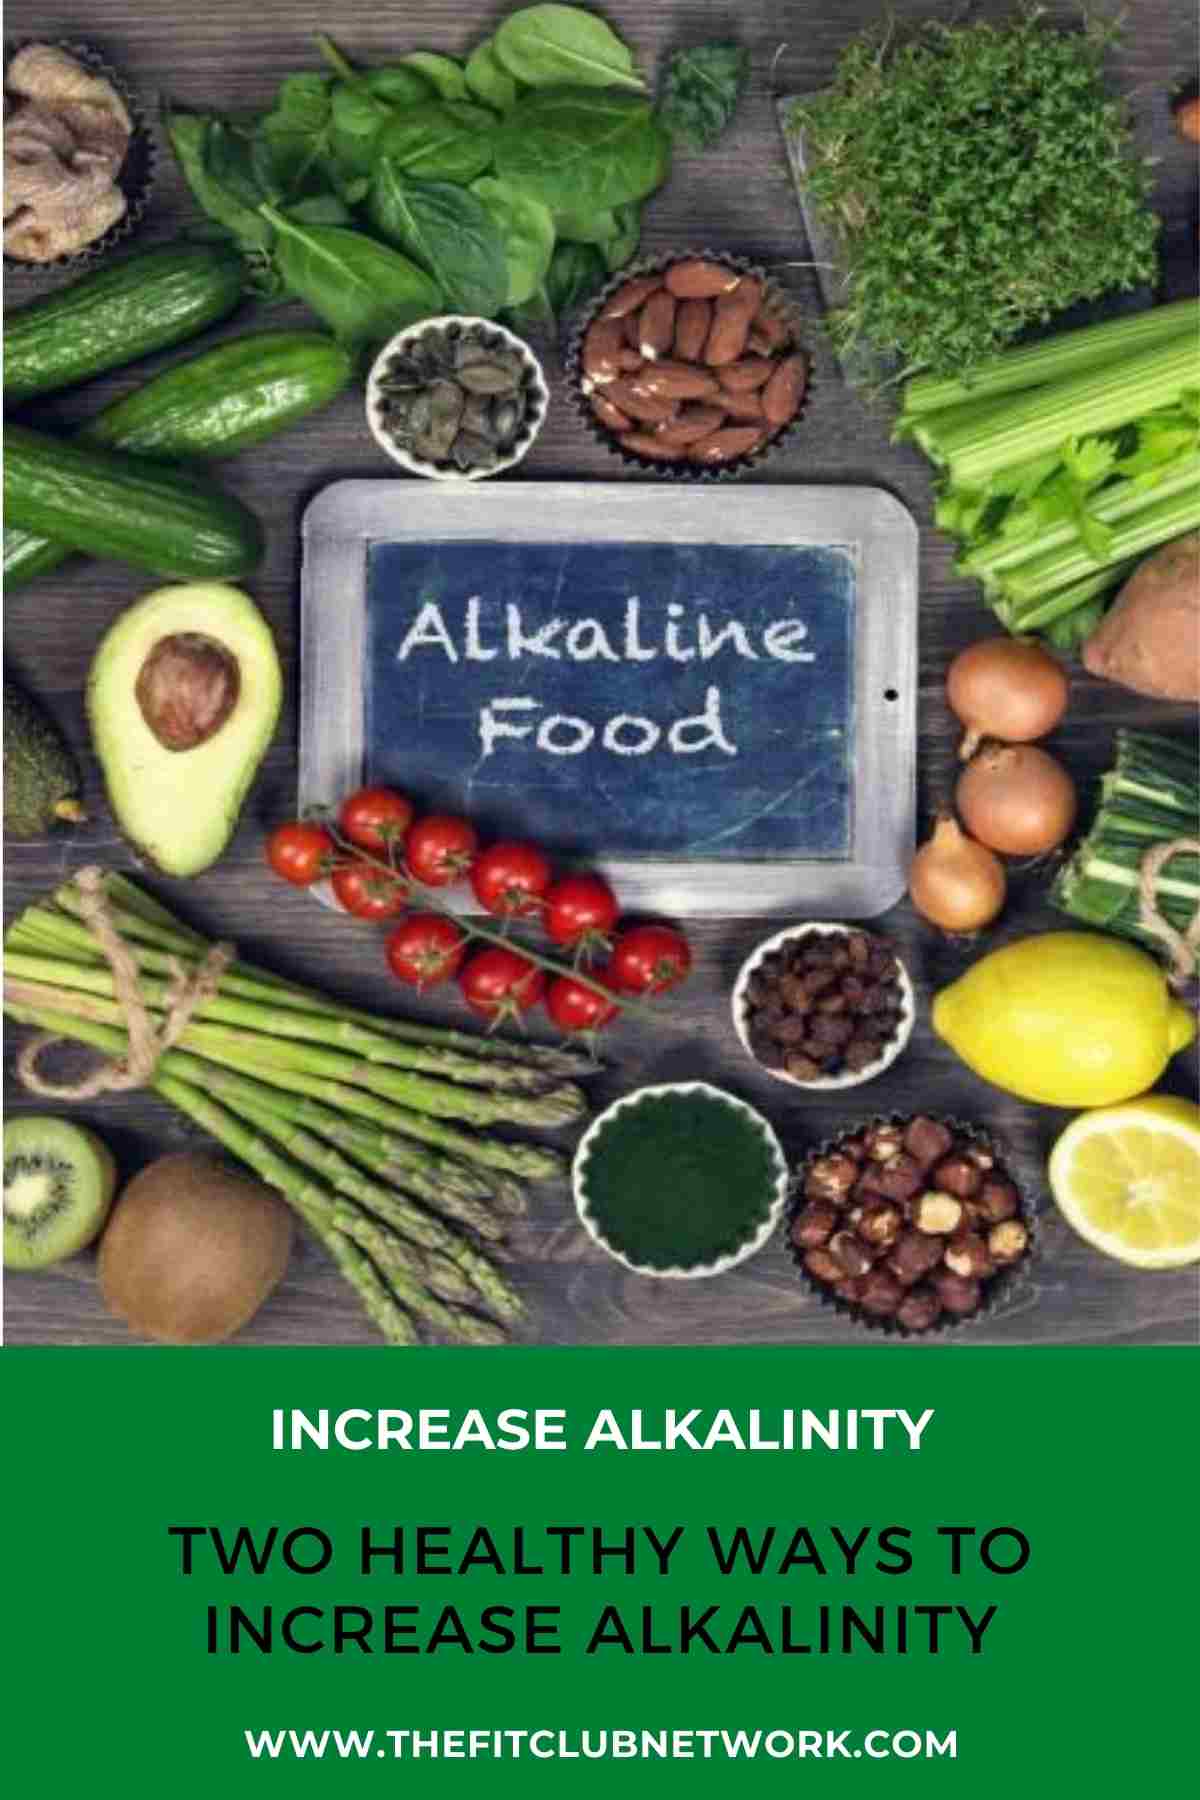 Two Healthy Ways to Increase Alkalinity